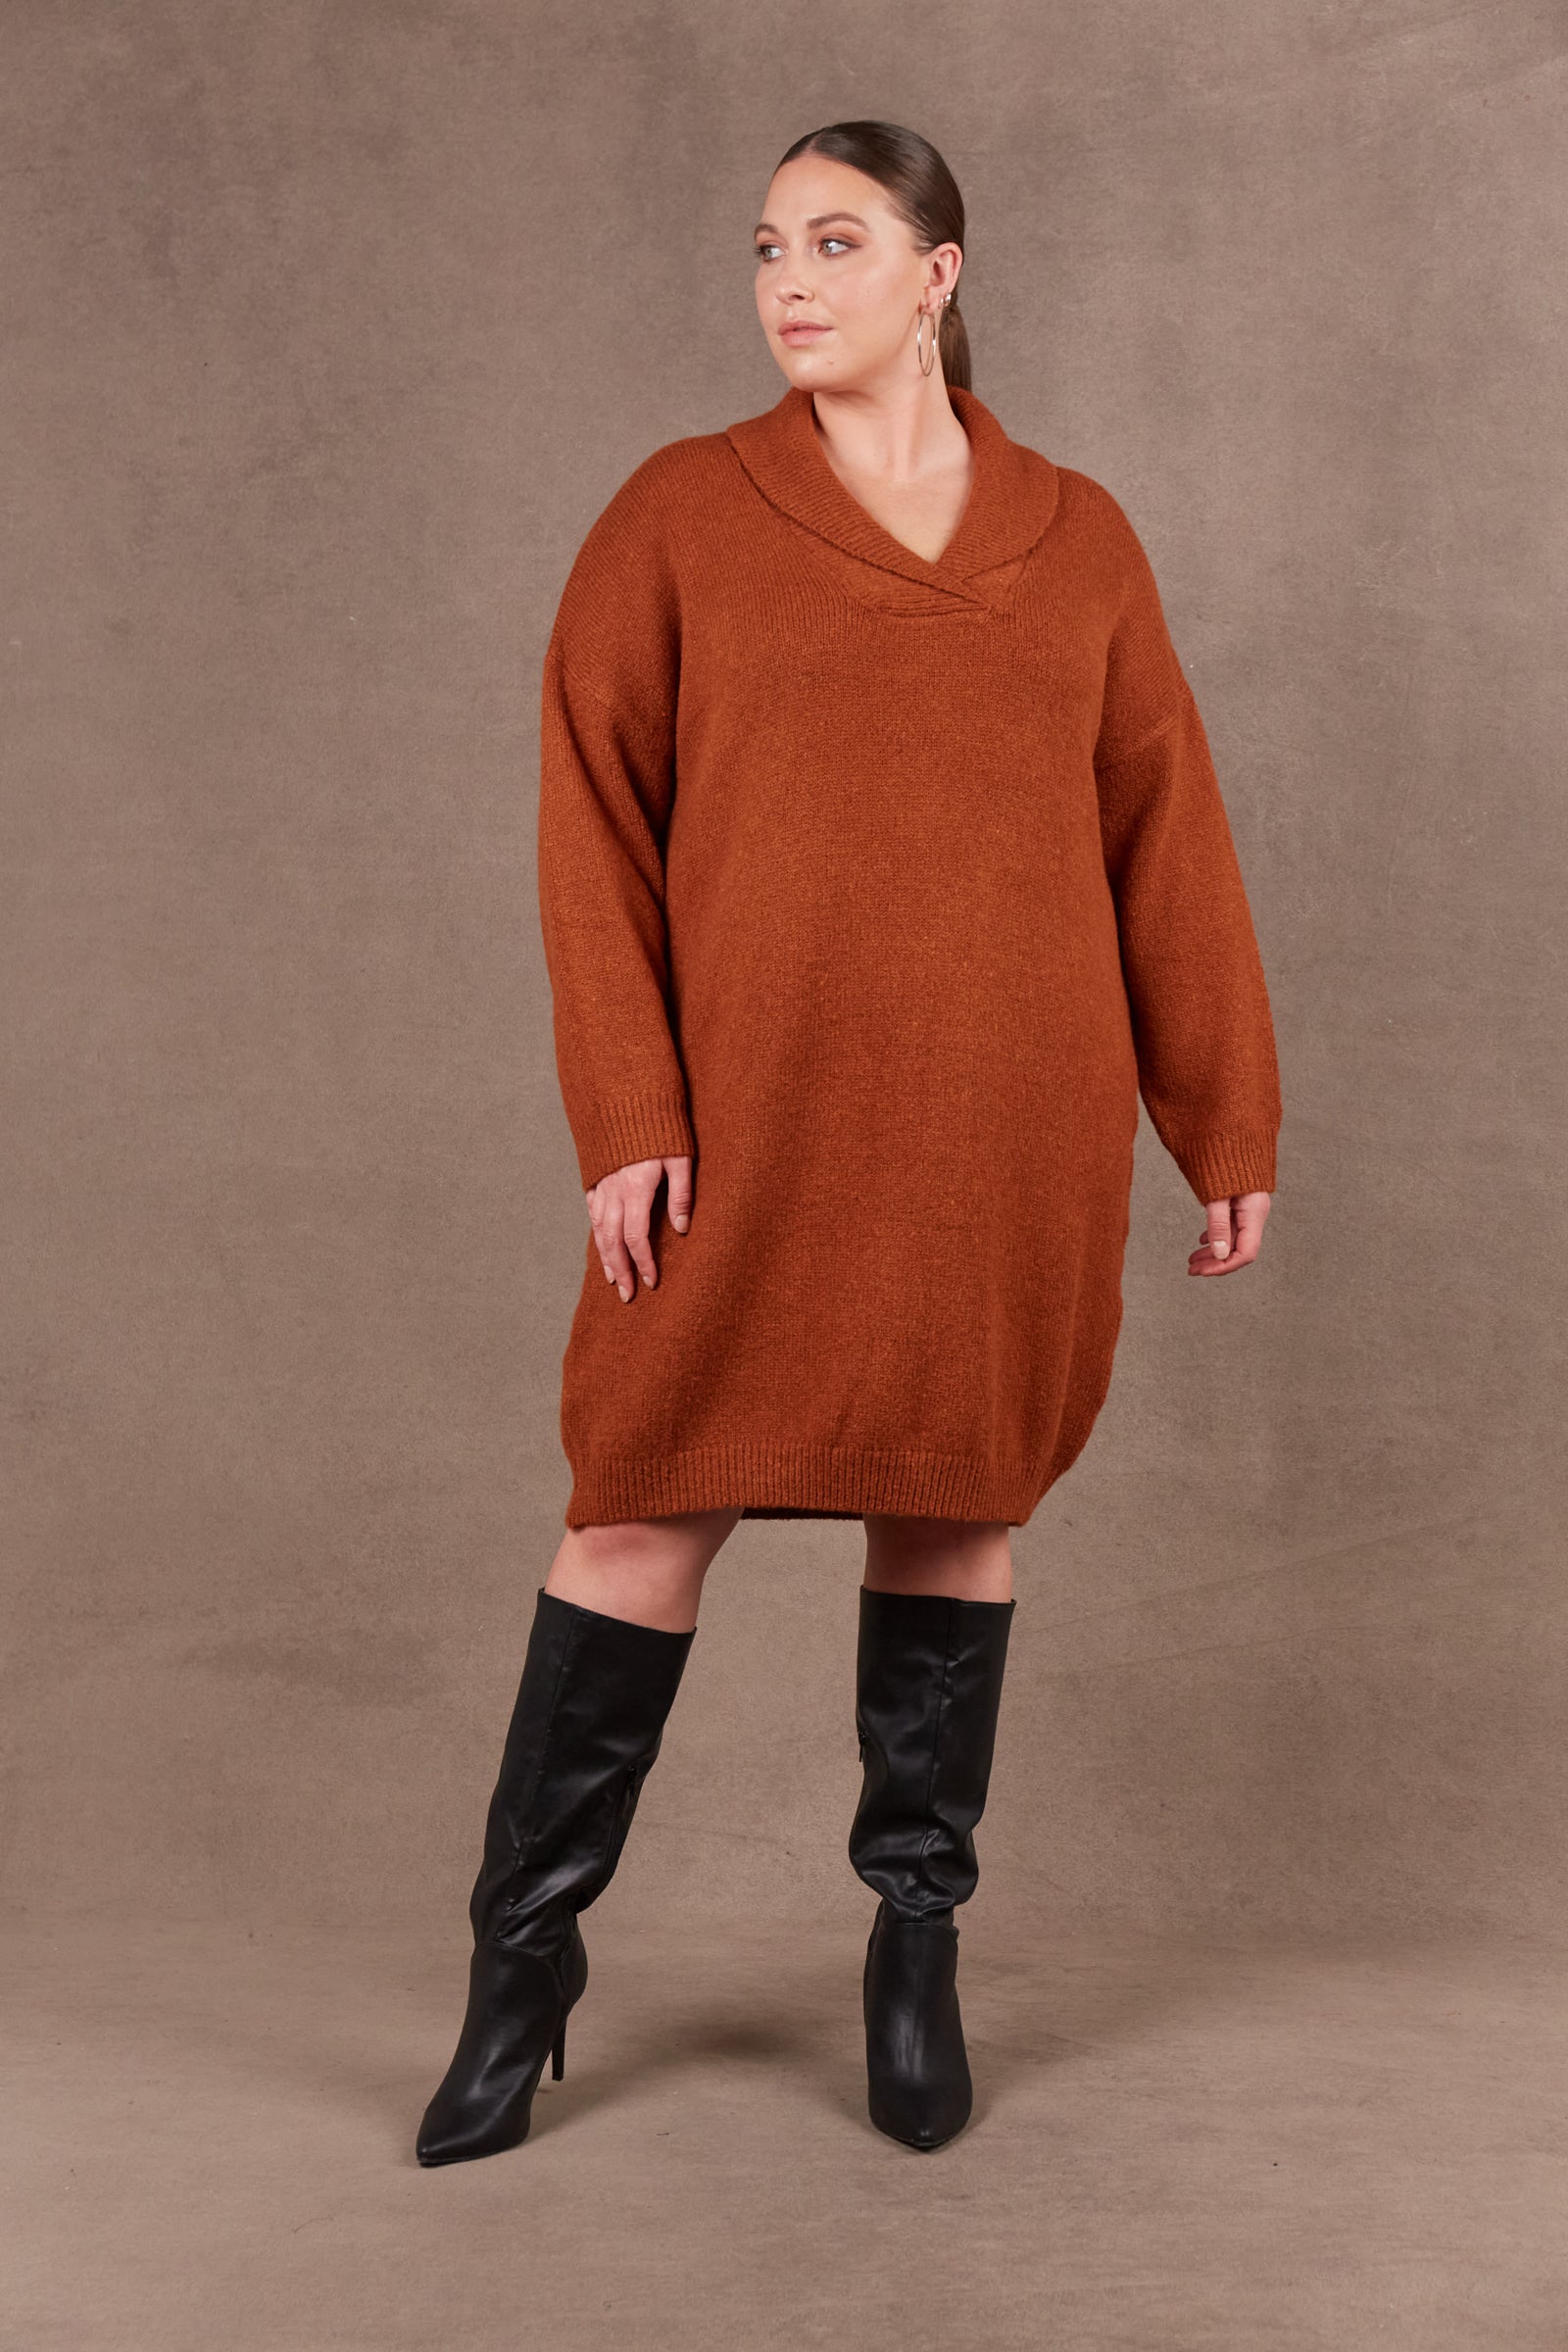 Paarl Top/Dress - Ochre-Tops-Eb & Ive-Onesize-The Bay Room